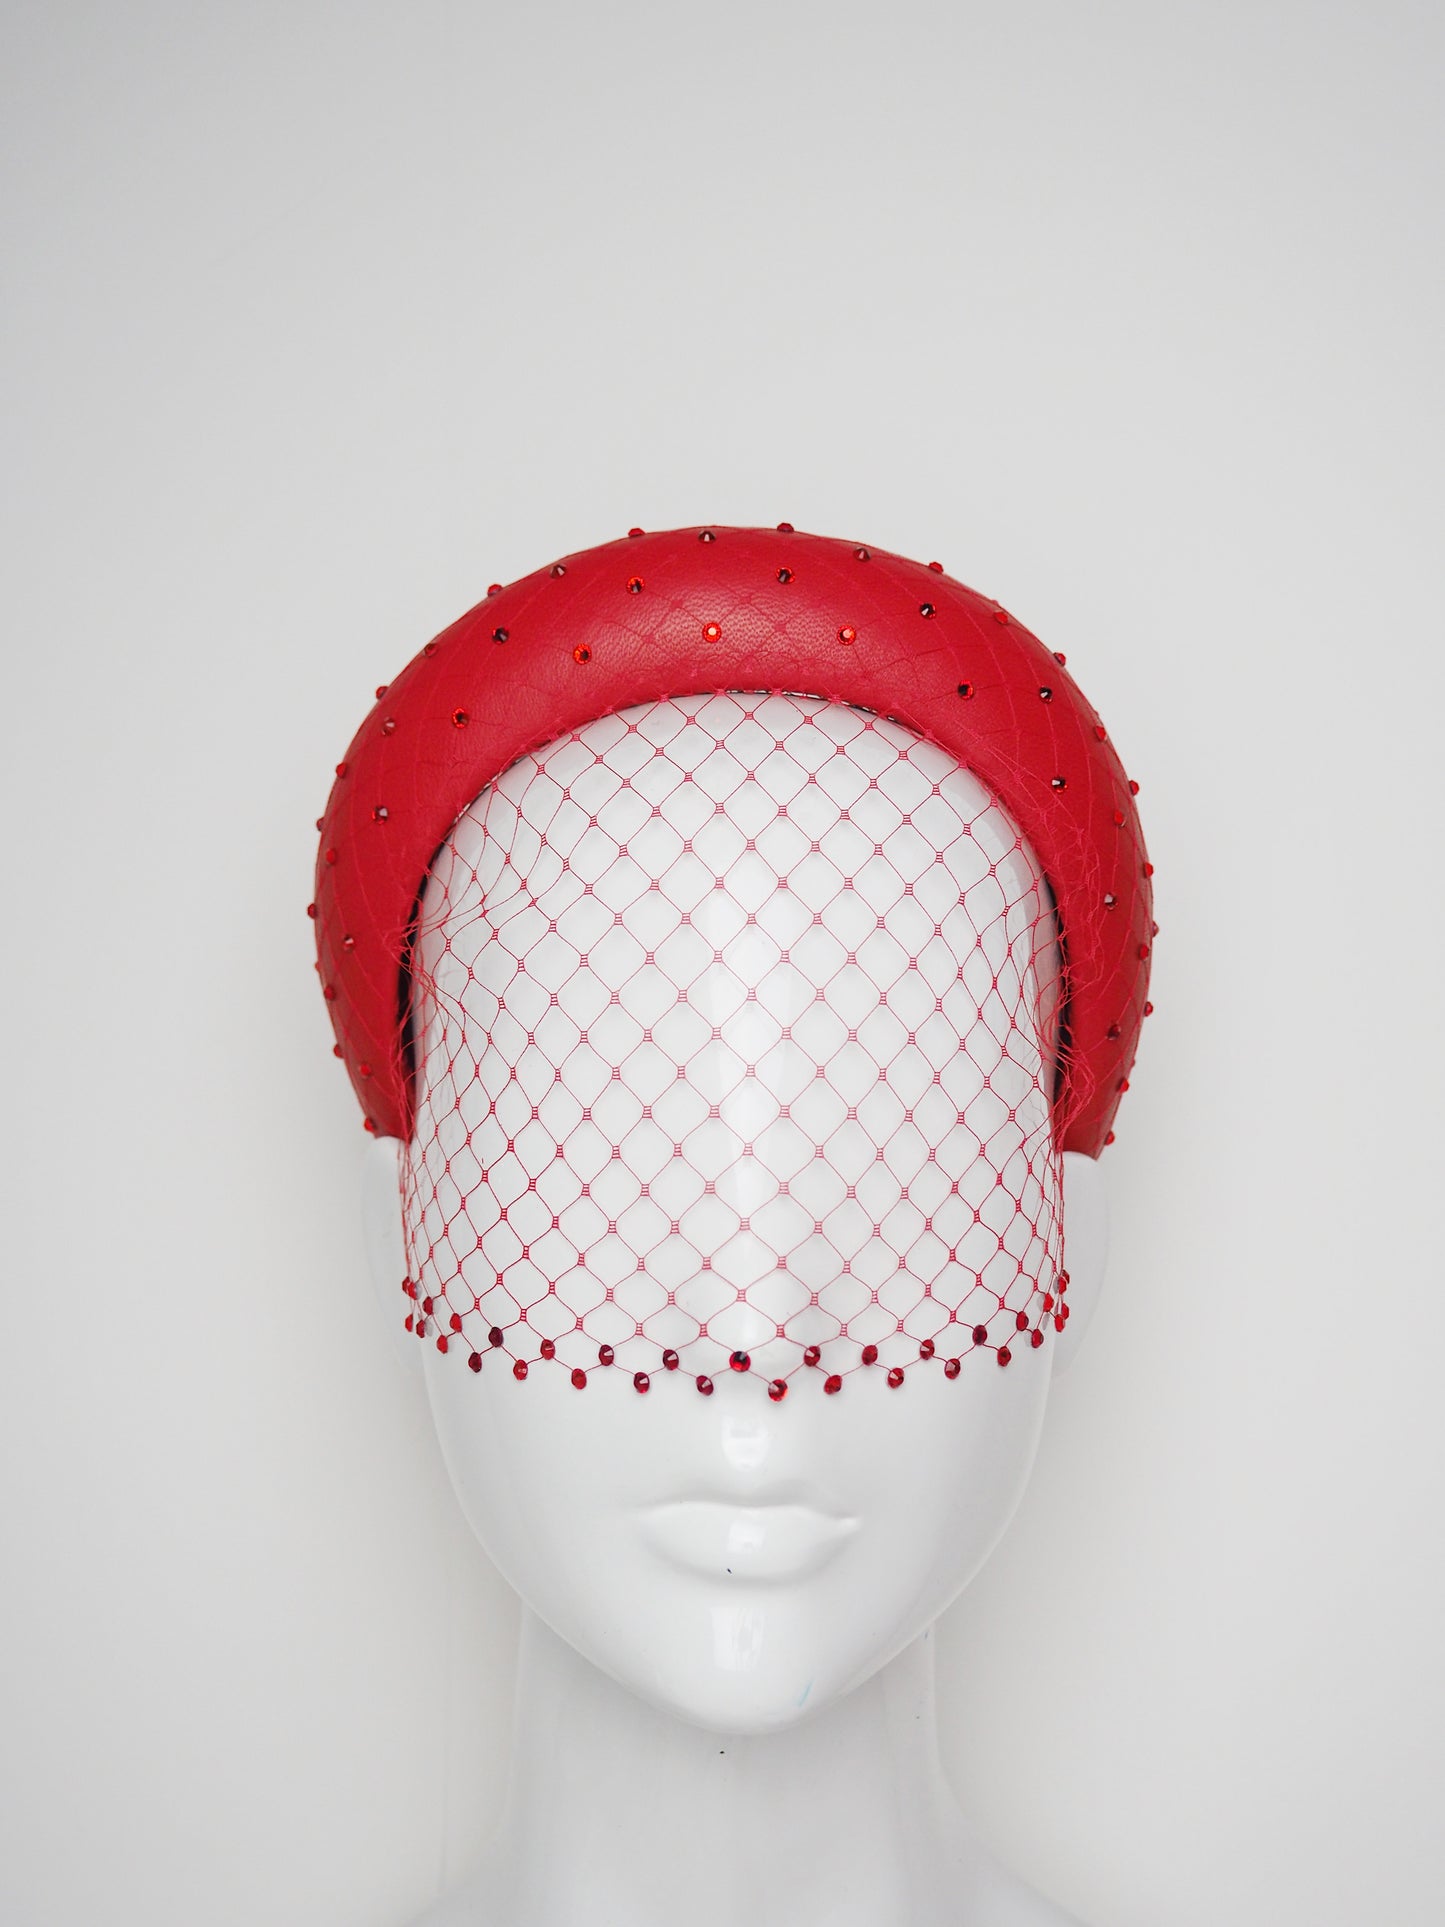 Mia - Sparkle  - Red leather 3d Blocked headband with veil and crystals with removable veil headband